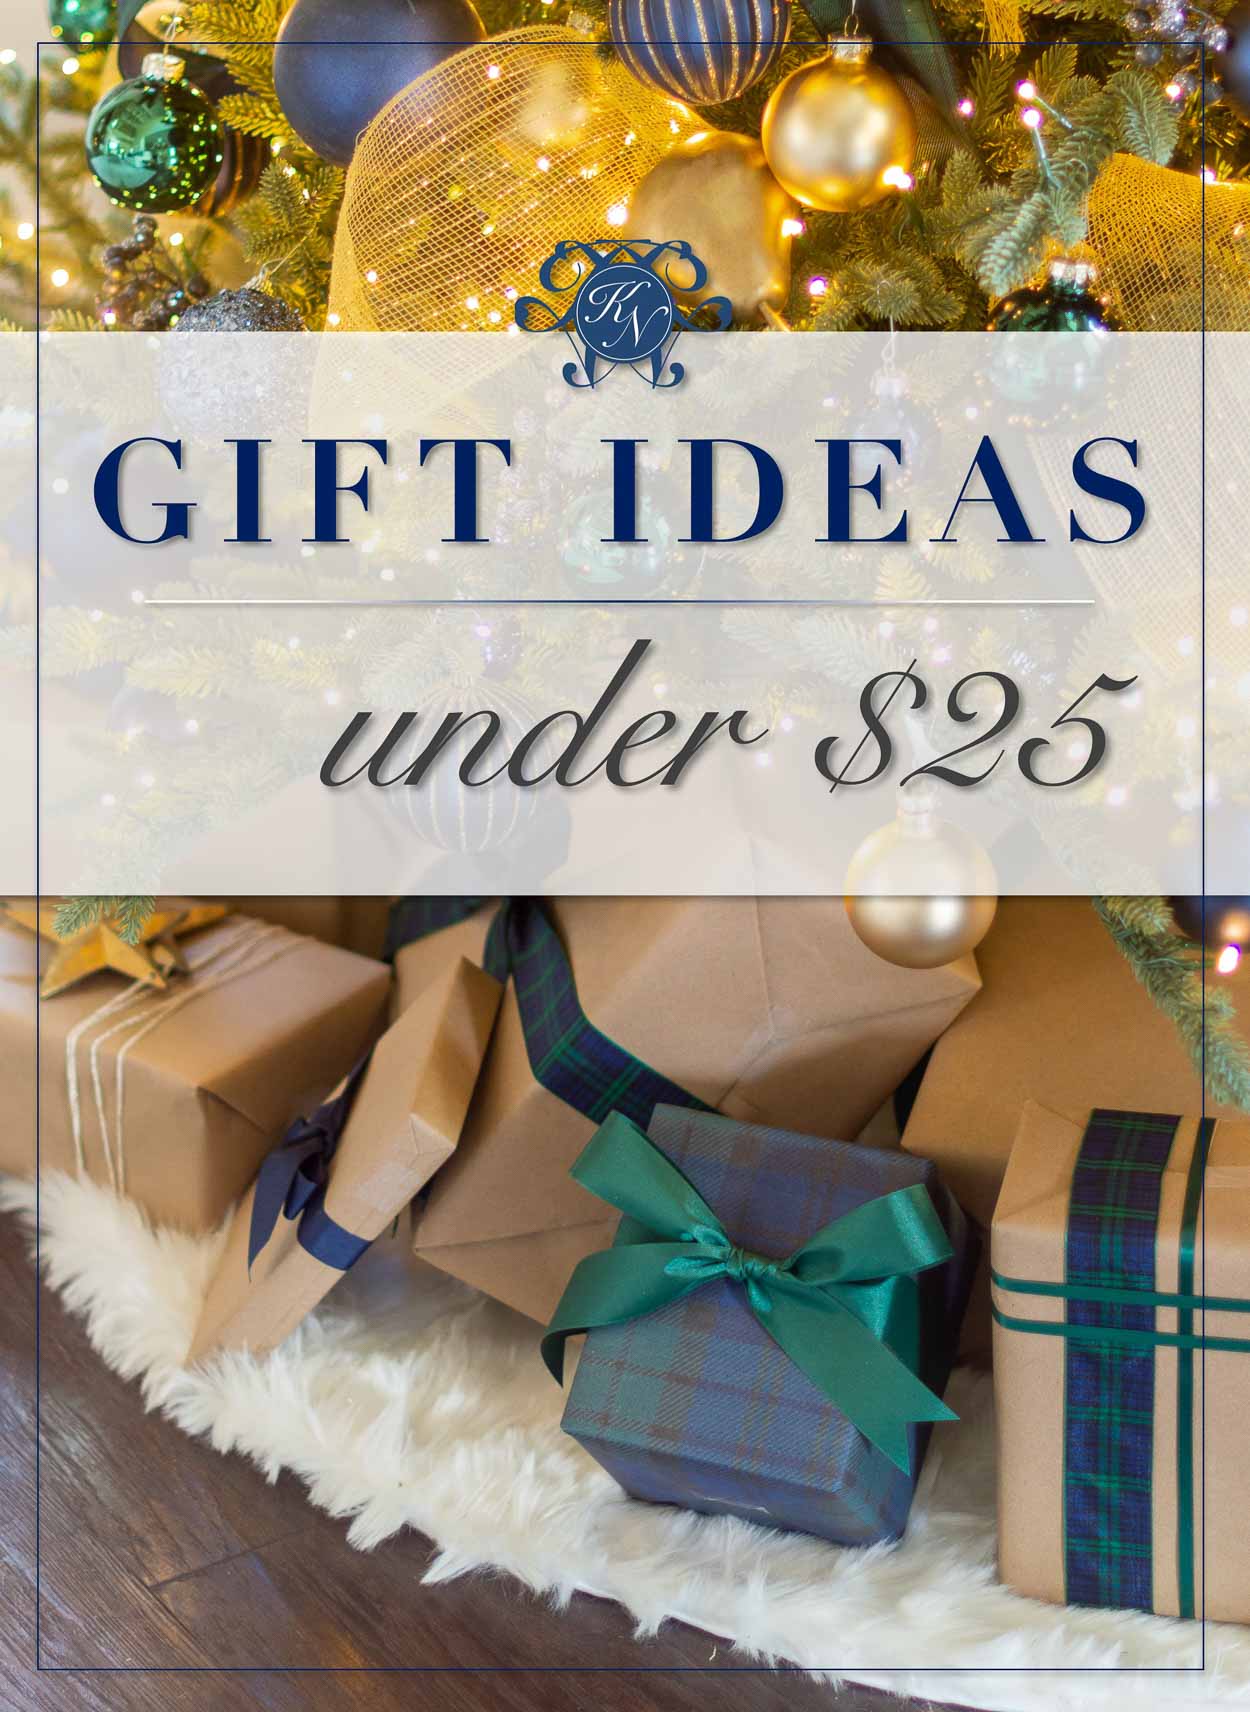 Holiday gifts under $25